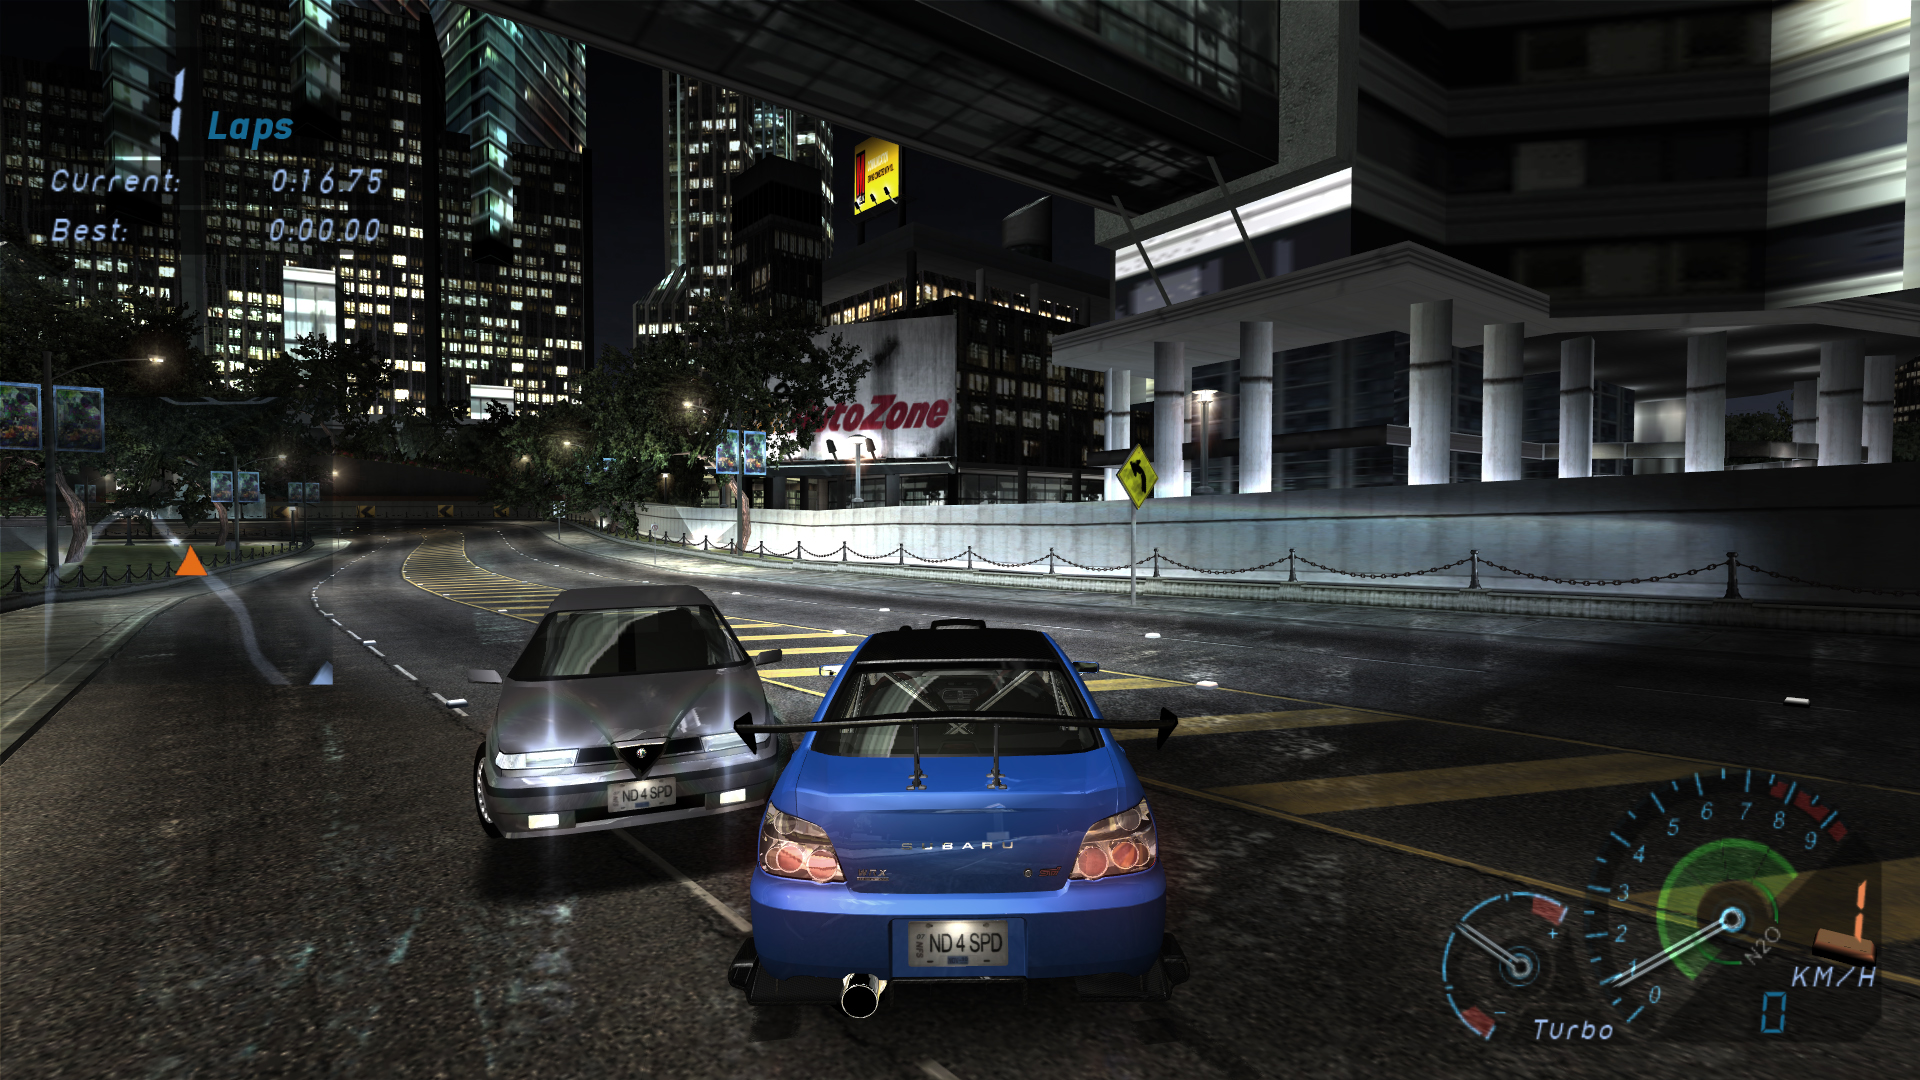 Image 22 - mSE (m2011 v2.0) mod for Need For Speed: Underground.